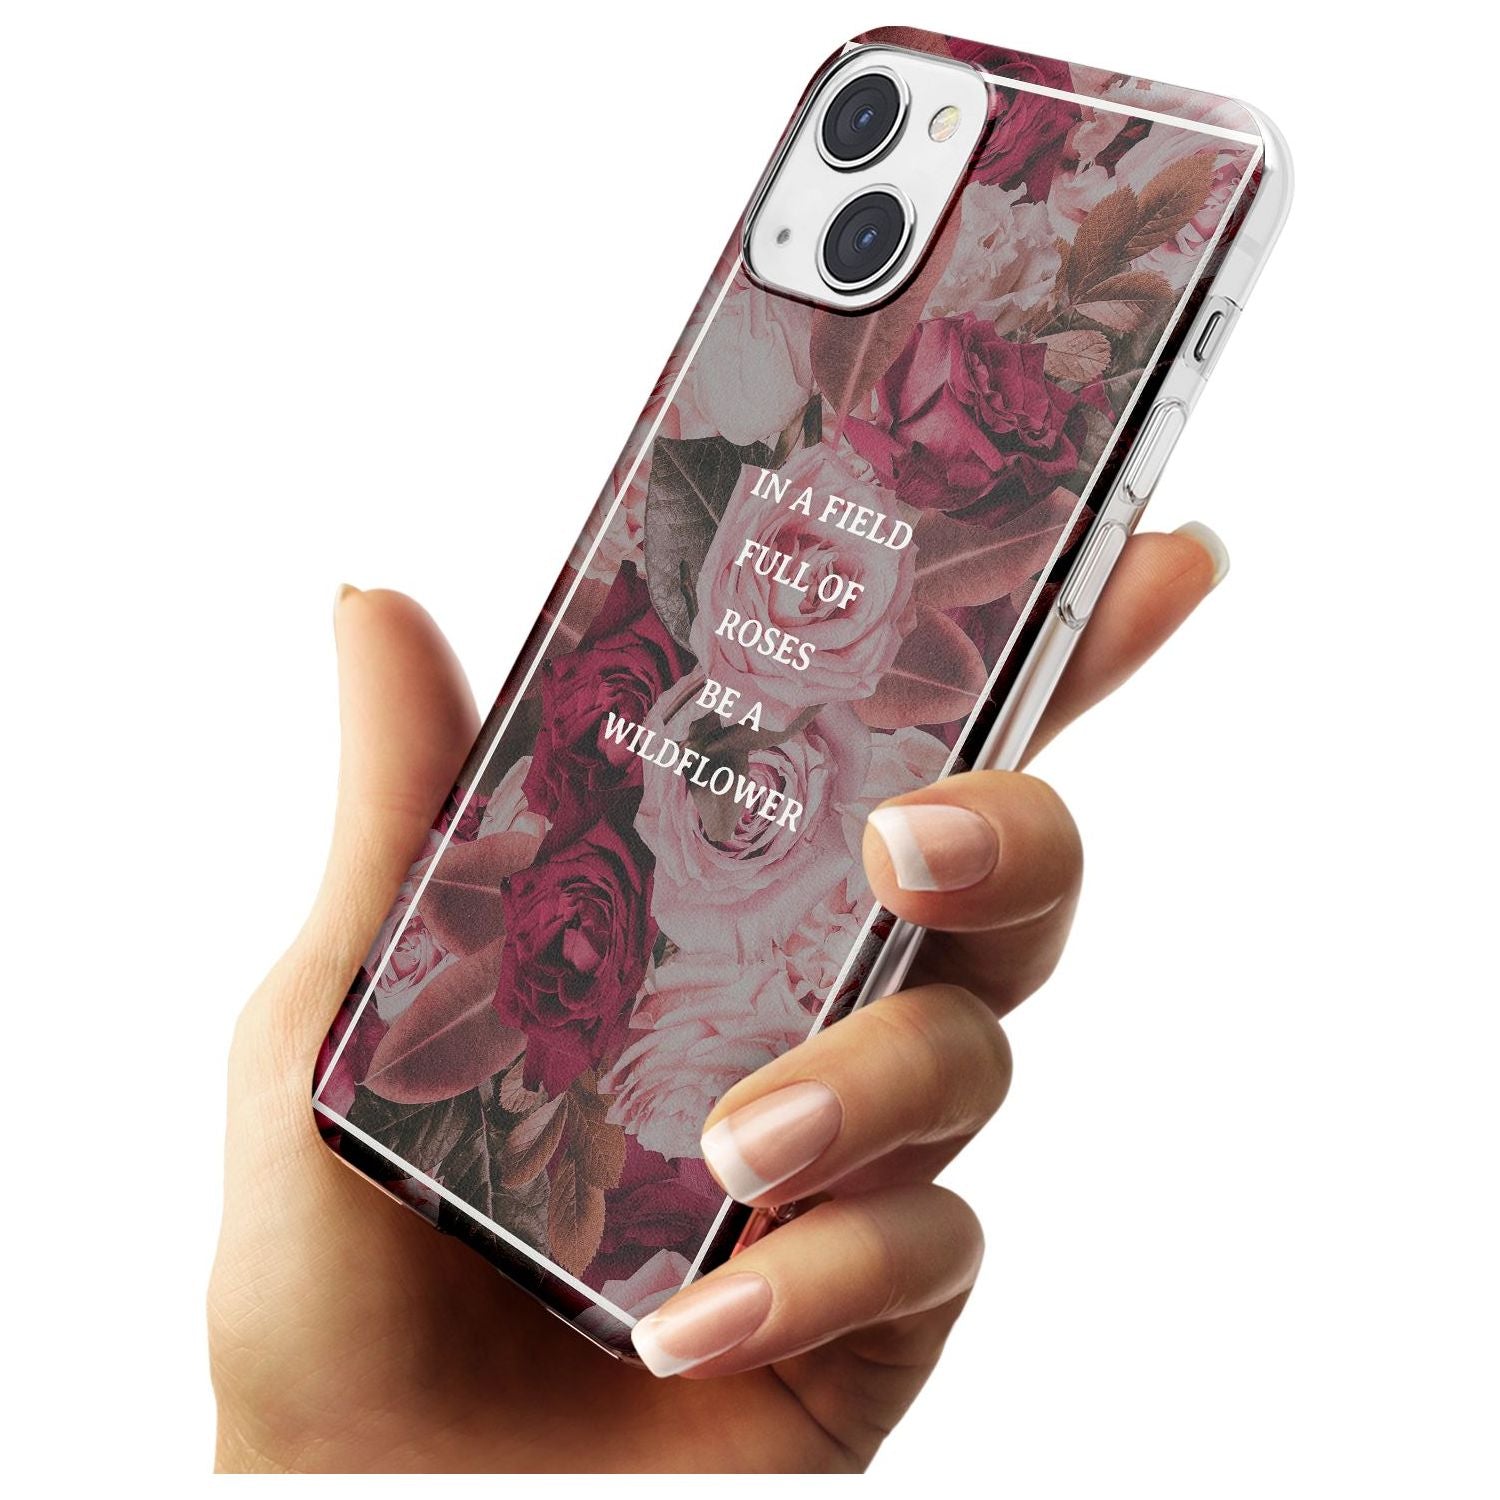 Be a Wildflower Floral Quote Phone Case iPhone 15 Pro Max / Black Impact Case,iPhone 15 Plus / Black Impact Case,iPhone 15 Pro / Black Impact Case,iPhone 15 / Black Impact Case,iPhone 15 Pro Max / Impact Case,iPhone 15 Plus / Impact Case,iPhone 15 Pro / Impact Case,iPhone 15 / Impact Case,iPhone 15 Pro Max / Magsafe Black Impact Case,iPhone 15 Plus / Magsafe Black Impact Case,iPhone 15 Pro / Magsafe Black Impact Case,iPhone 15 / Magsafe Black Impact Case,iPhone 14 Pro Max / Black Impact Case,iPhone 14 Plus 